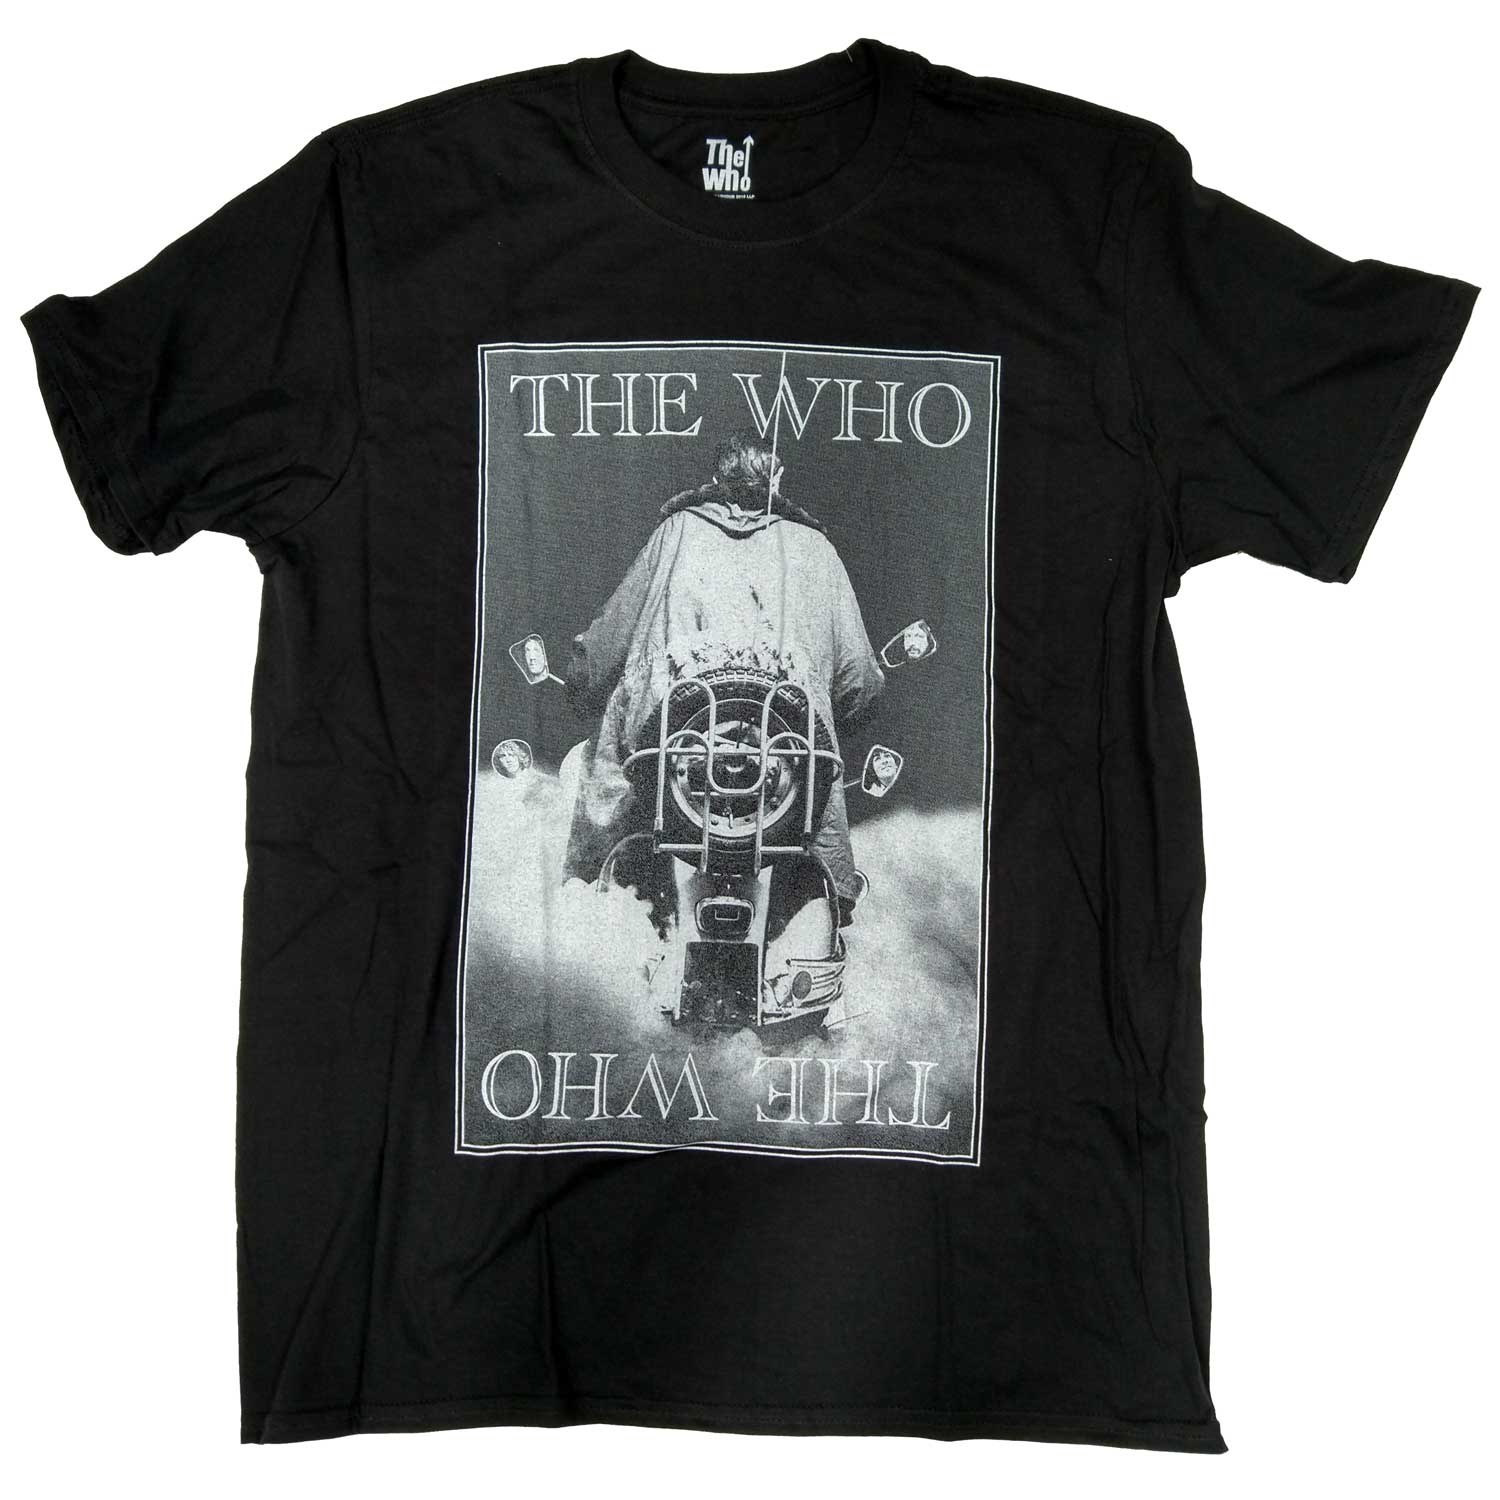 The Who T Shirt - Quadrophenia Scooter Upside Down Logo 100% Official